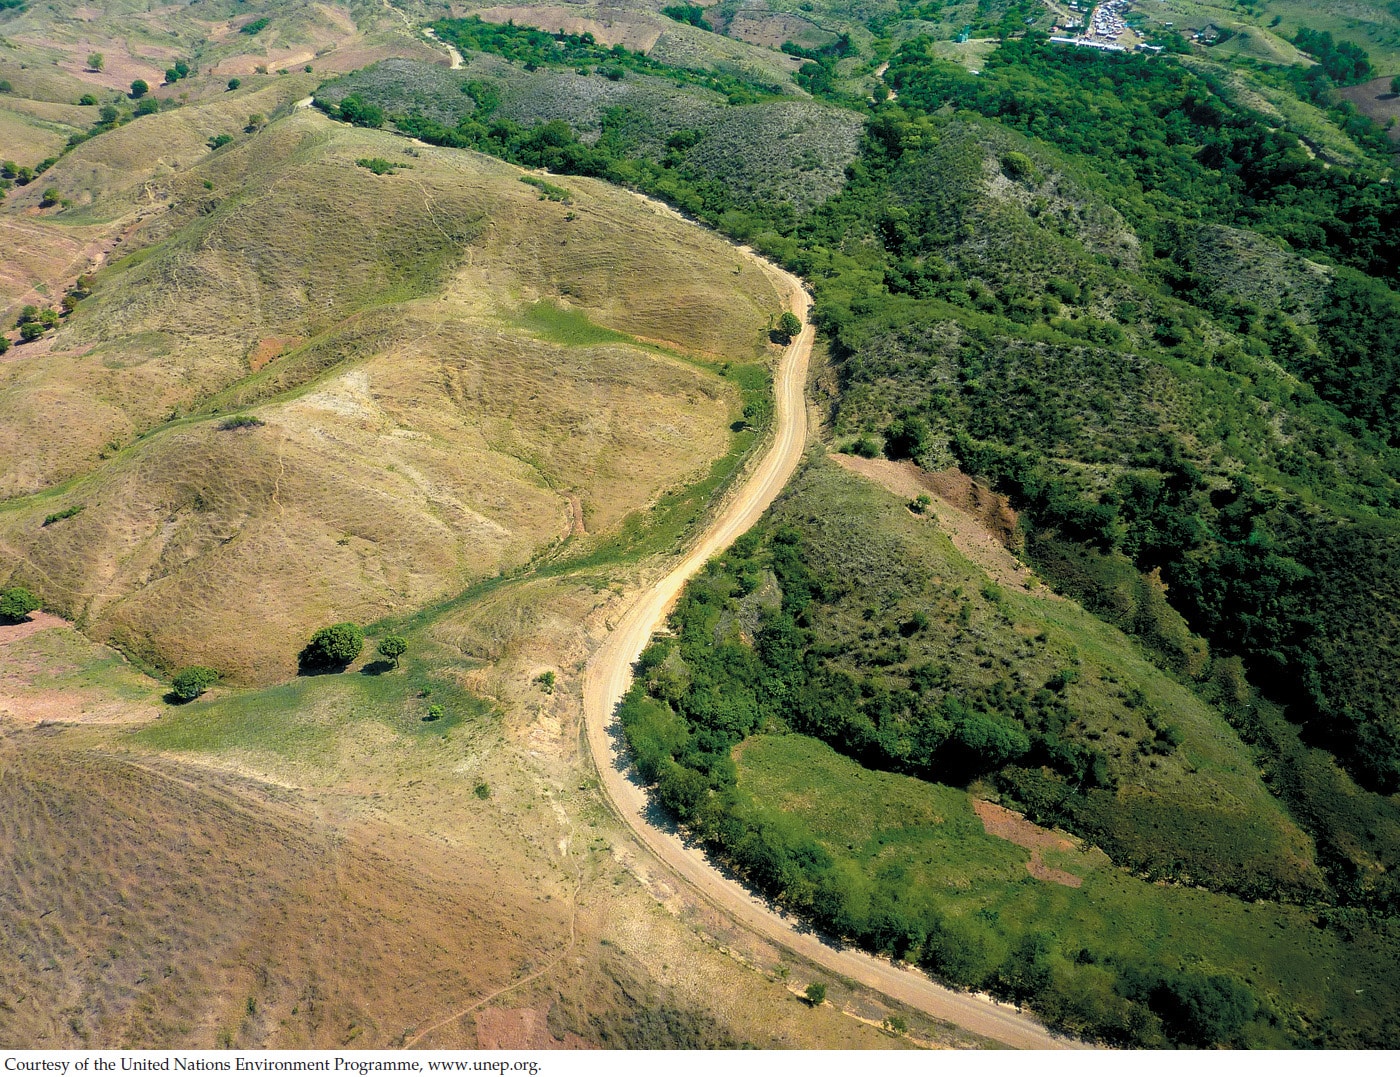 forests in haiti; haiti deforestation; An aerial view of the border between Haiti (left) and the Dominican Republic (right) provides a dramatic illustration of the extent of soil degradation in Haiti